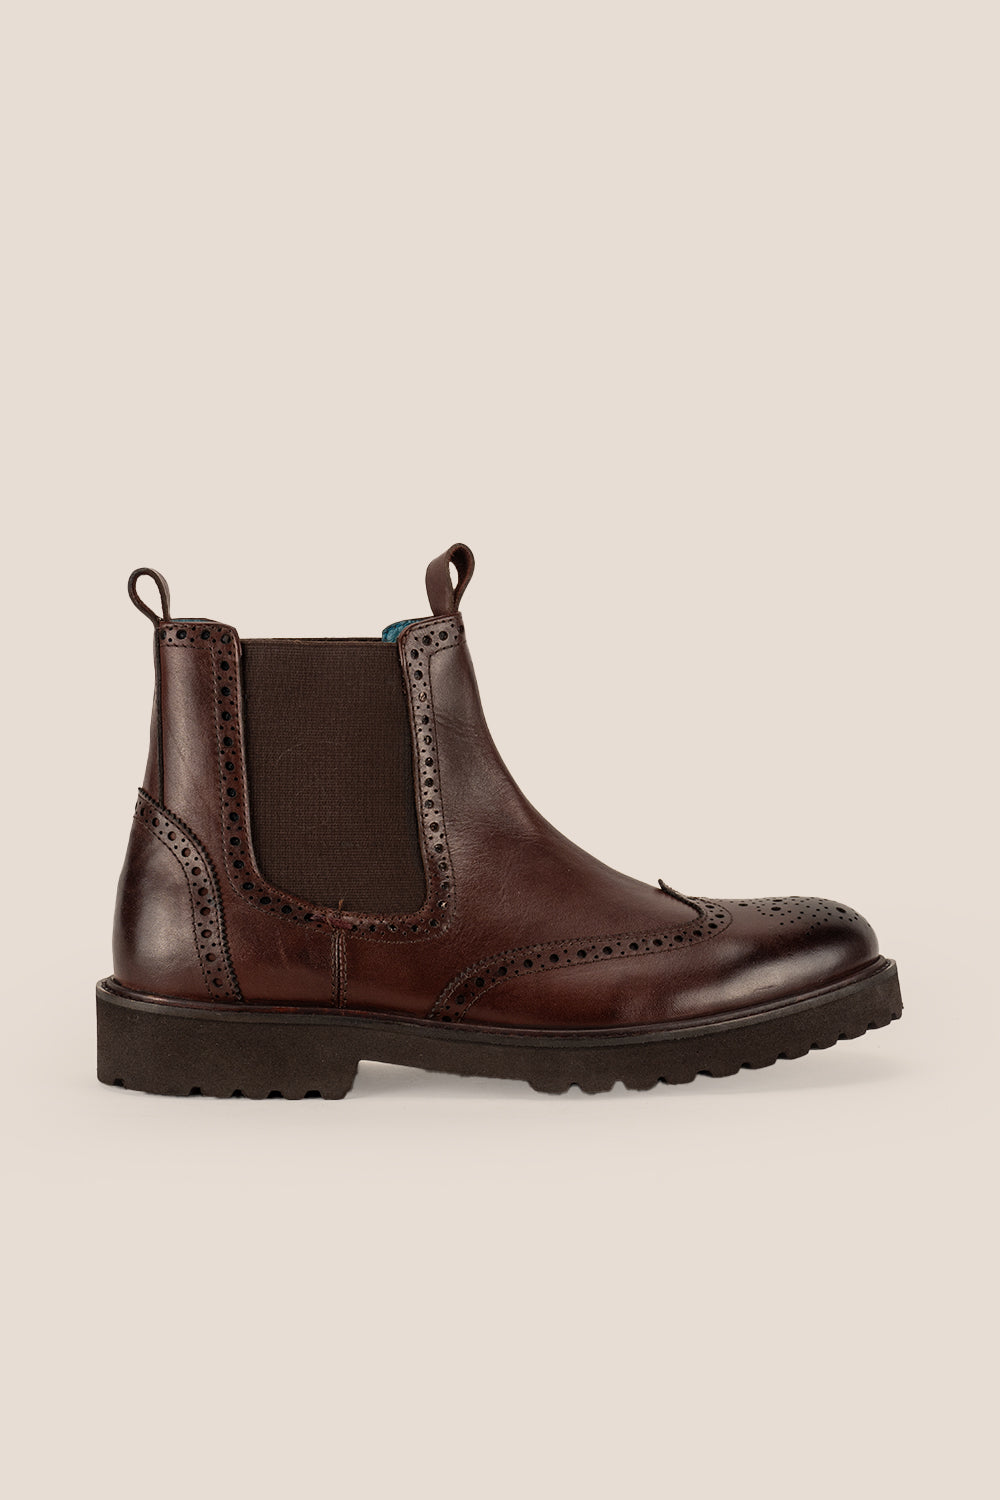 Why Brogue Brown Boots Are the Ultimate Footwear Investment